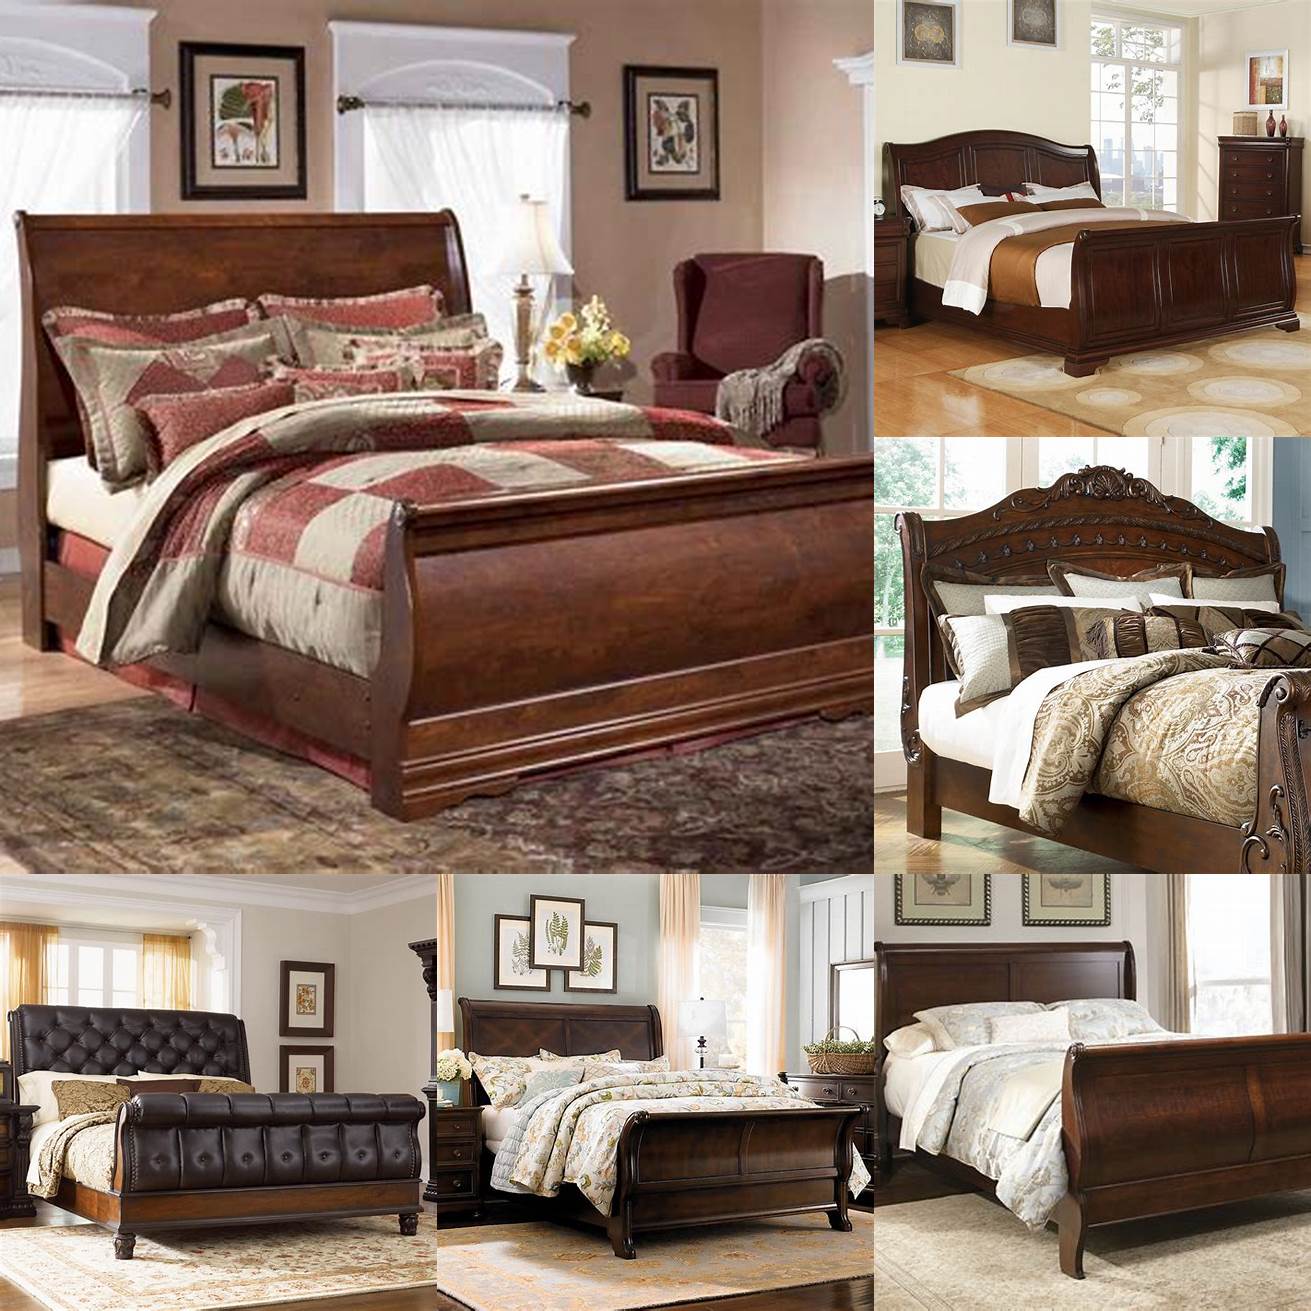 Image 6 A Sleigh Bed Queen with a statement wall